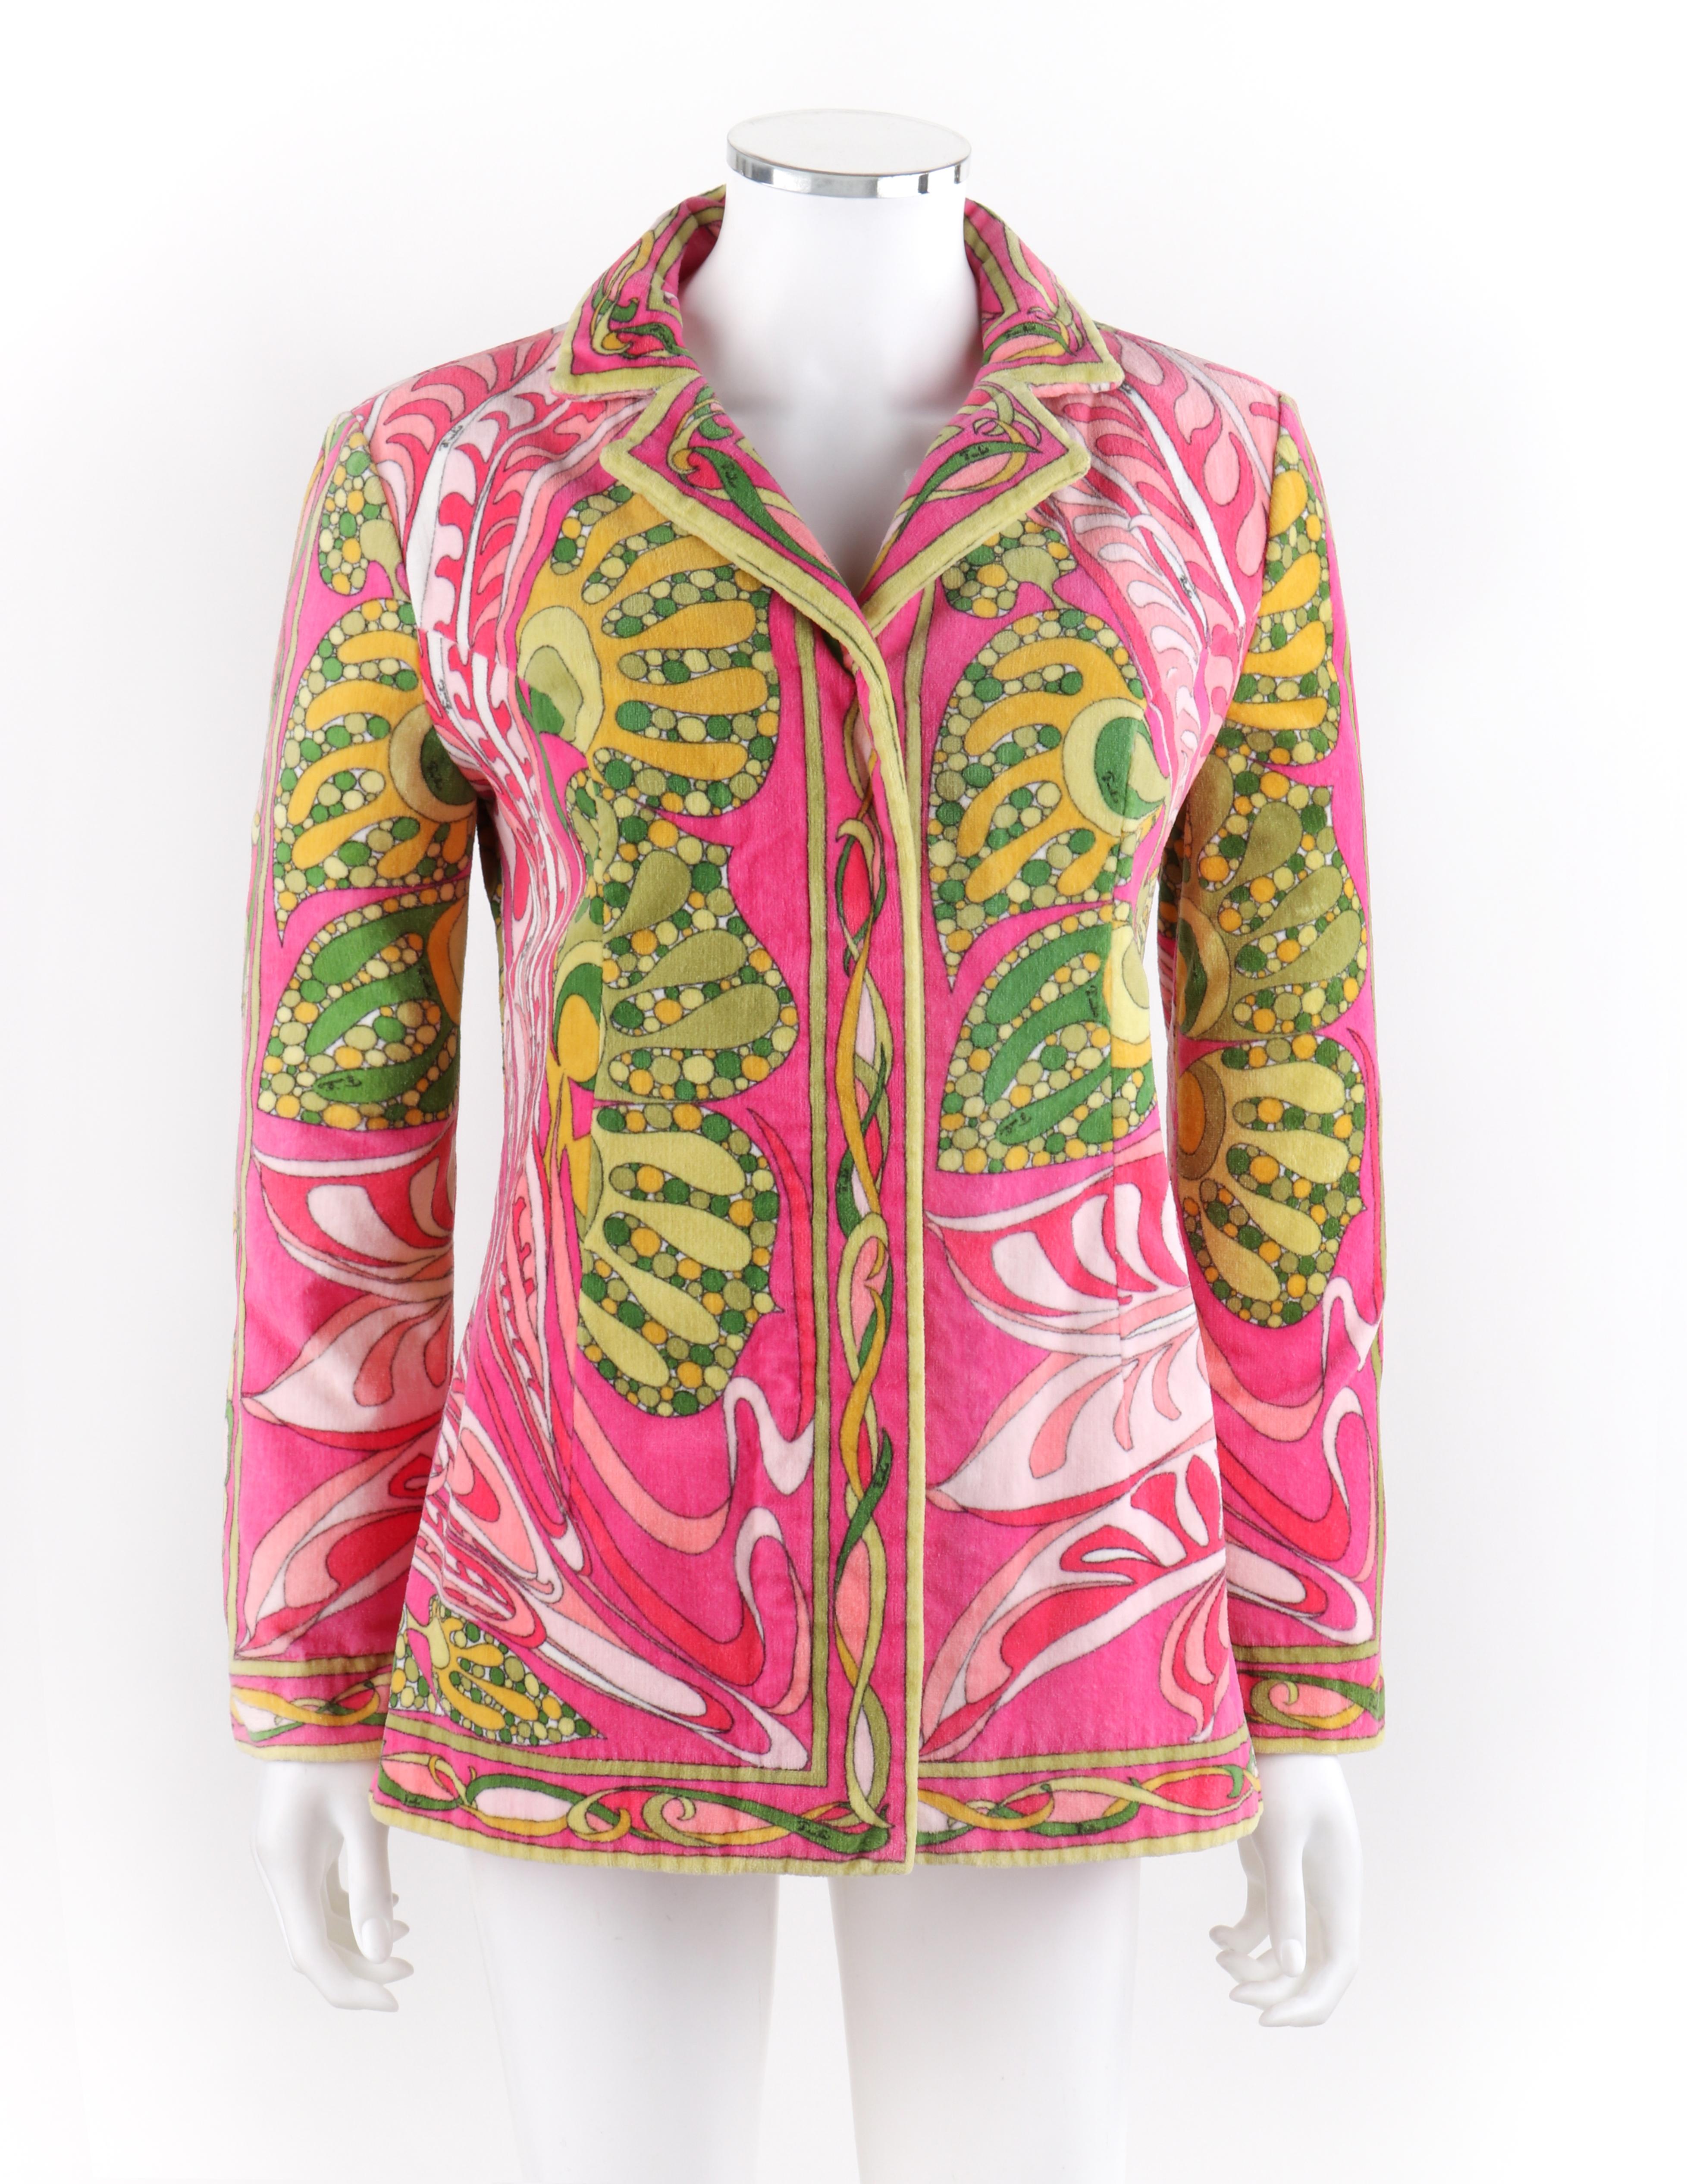 EMILIO PUCCI c.1970s Signature Tropical Op Art Terrycloth Beach Cover Top
 
Circa: 1970’s
Label(s): Emilio Pucci, Exclusively for Saks Fifth Avenue
Designer: Emilio Pucci
Style: Blazer
Color(s): Shades of pink, green, yellow, and white (exterior,